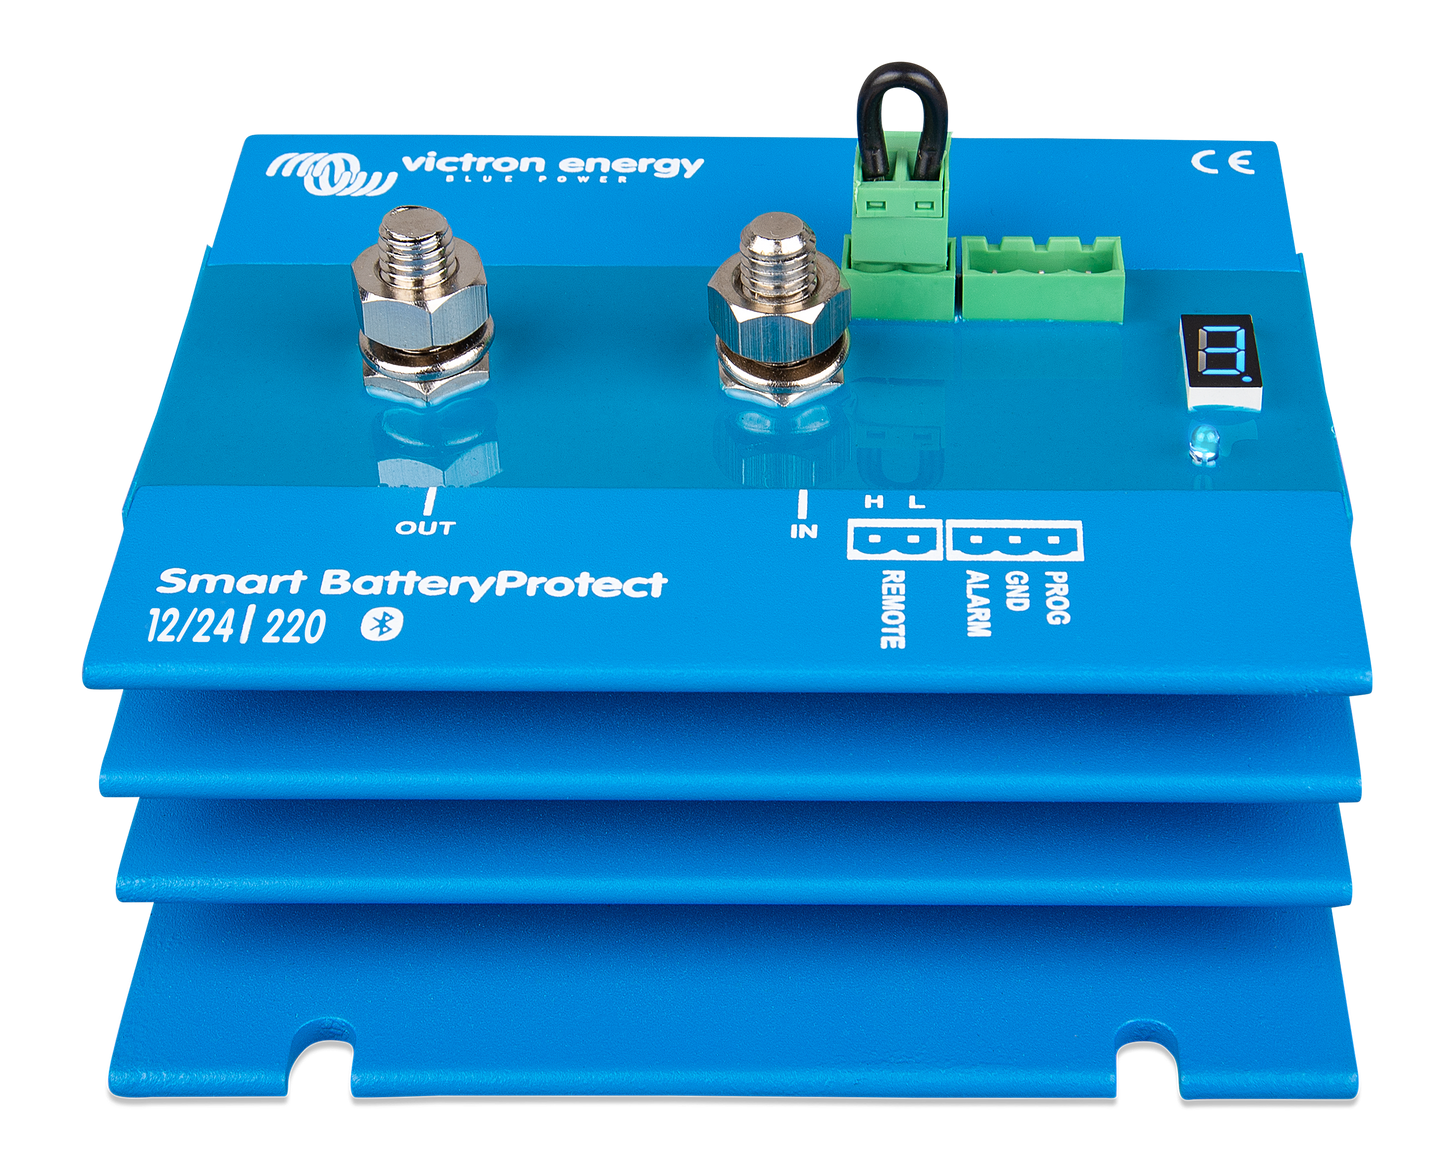 Victron Smart BatteryProtect